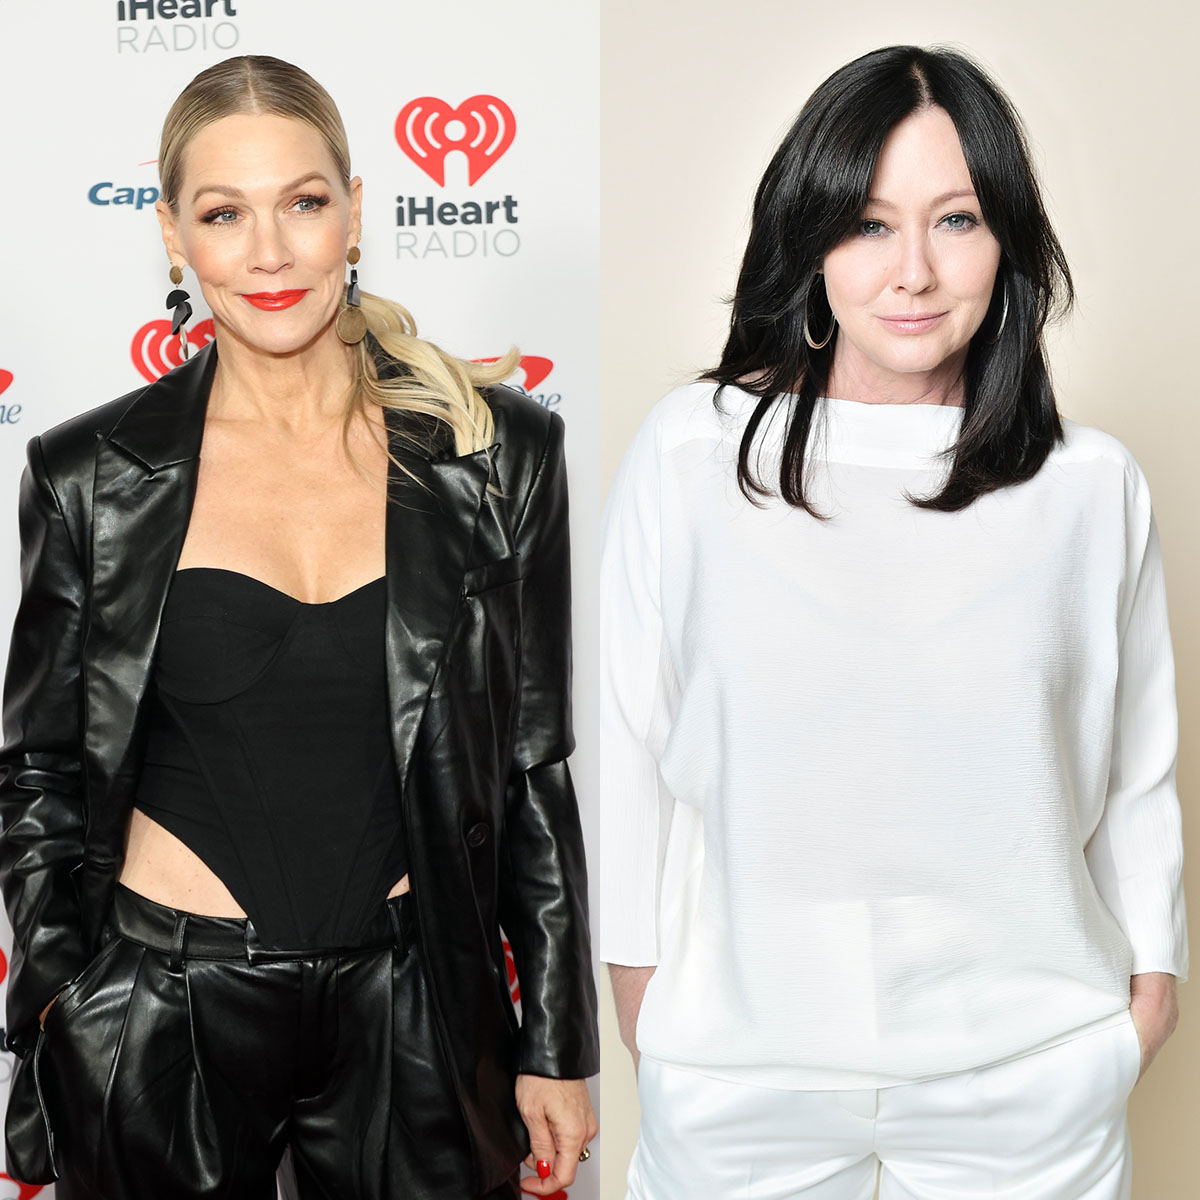 Shannen Doherty Details Prank That Led to Fight With Jennie Garth on Beverly Hills, 90210 Set